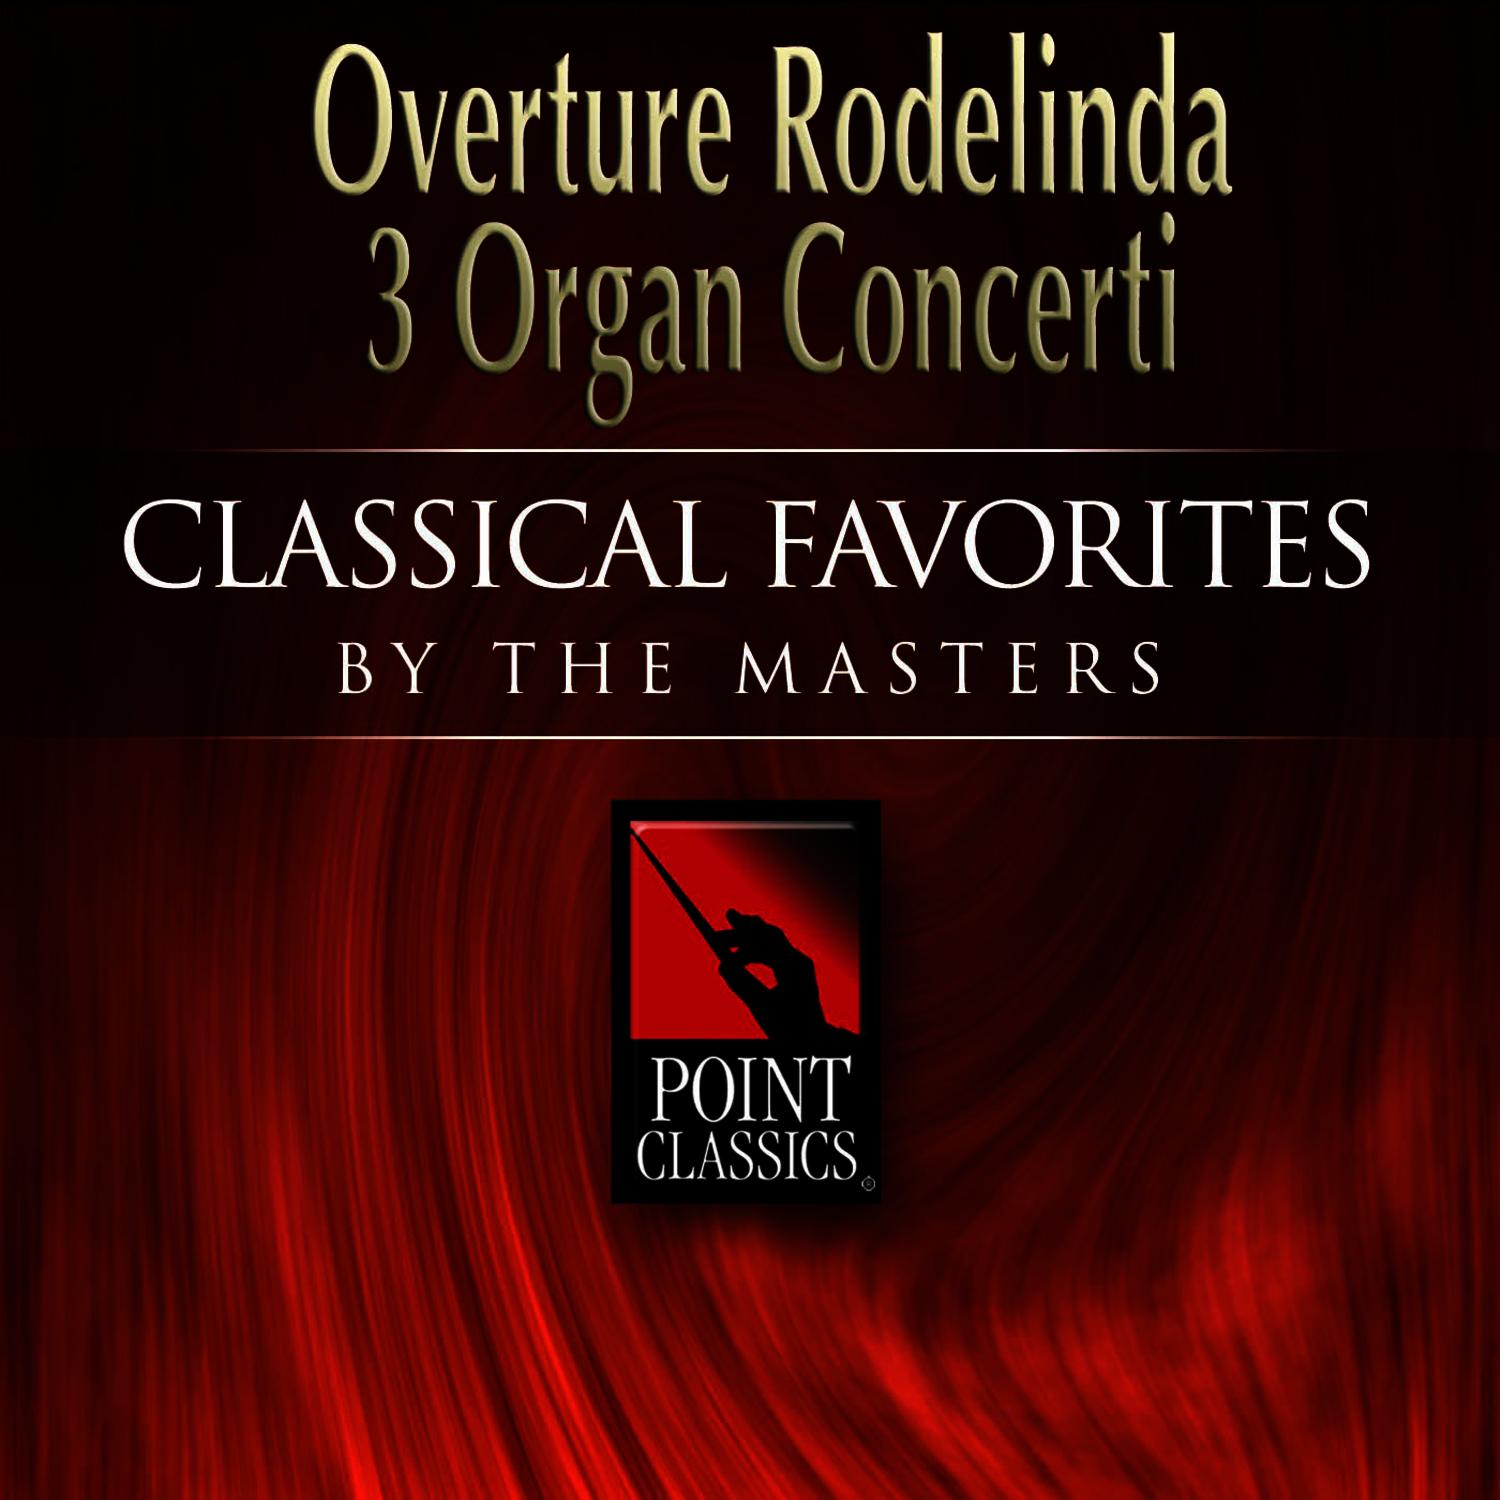 Concerto for Organ and Orchestra No. 1, in G minor, Op. 4: Andante